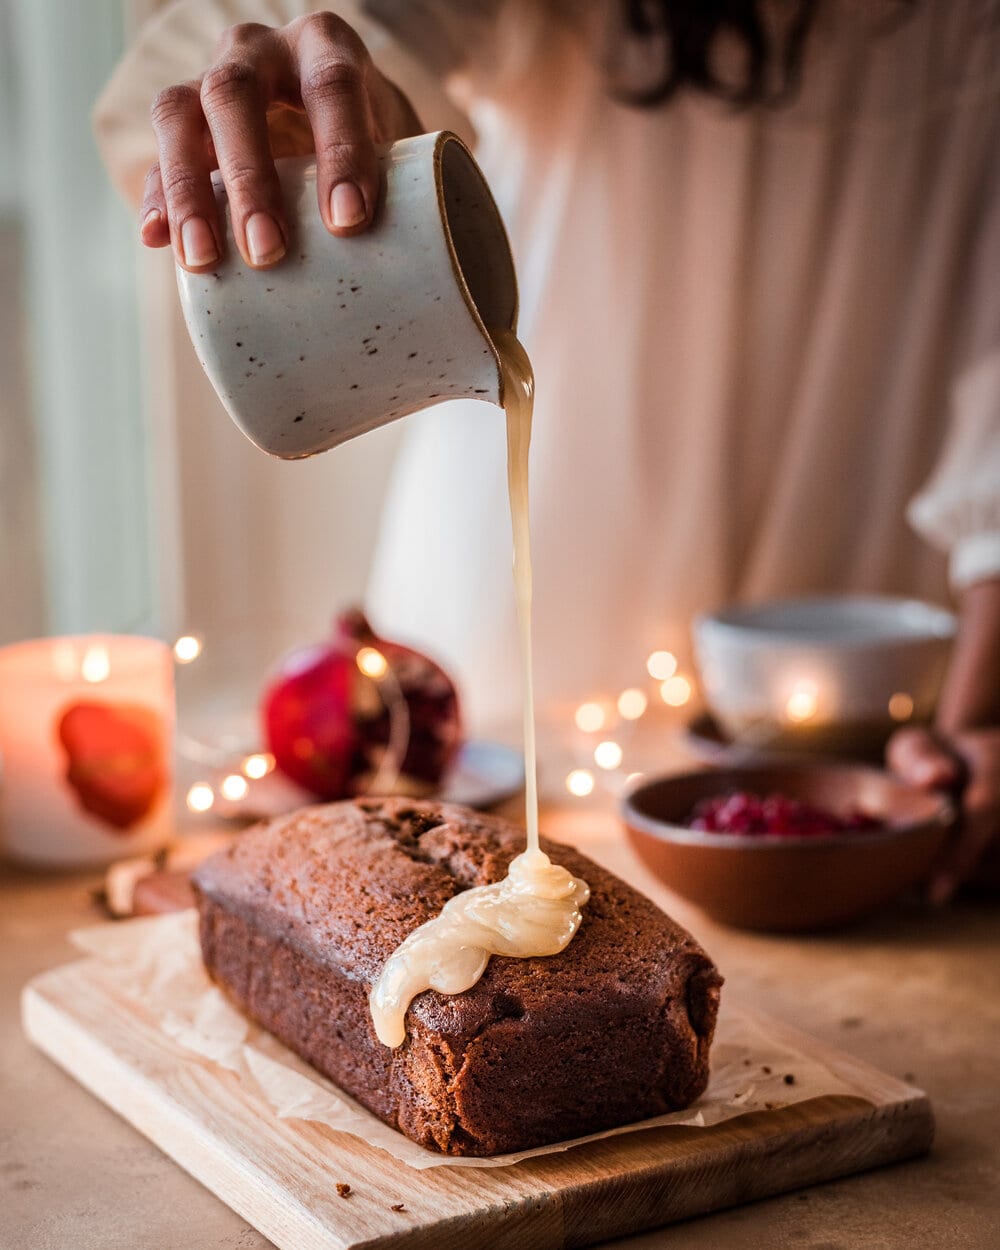 Woman pouring icing onto gingerbread cake on wood cutting board.